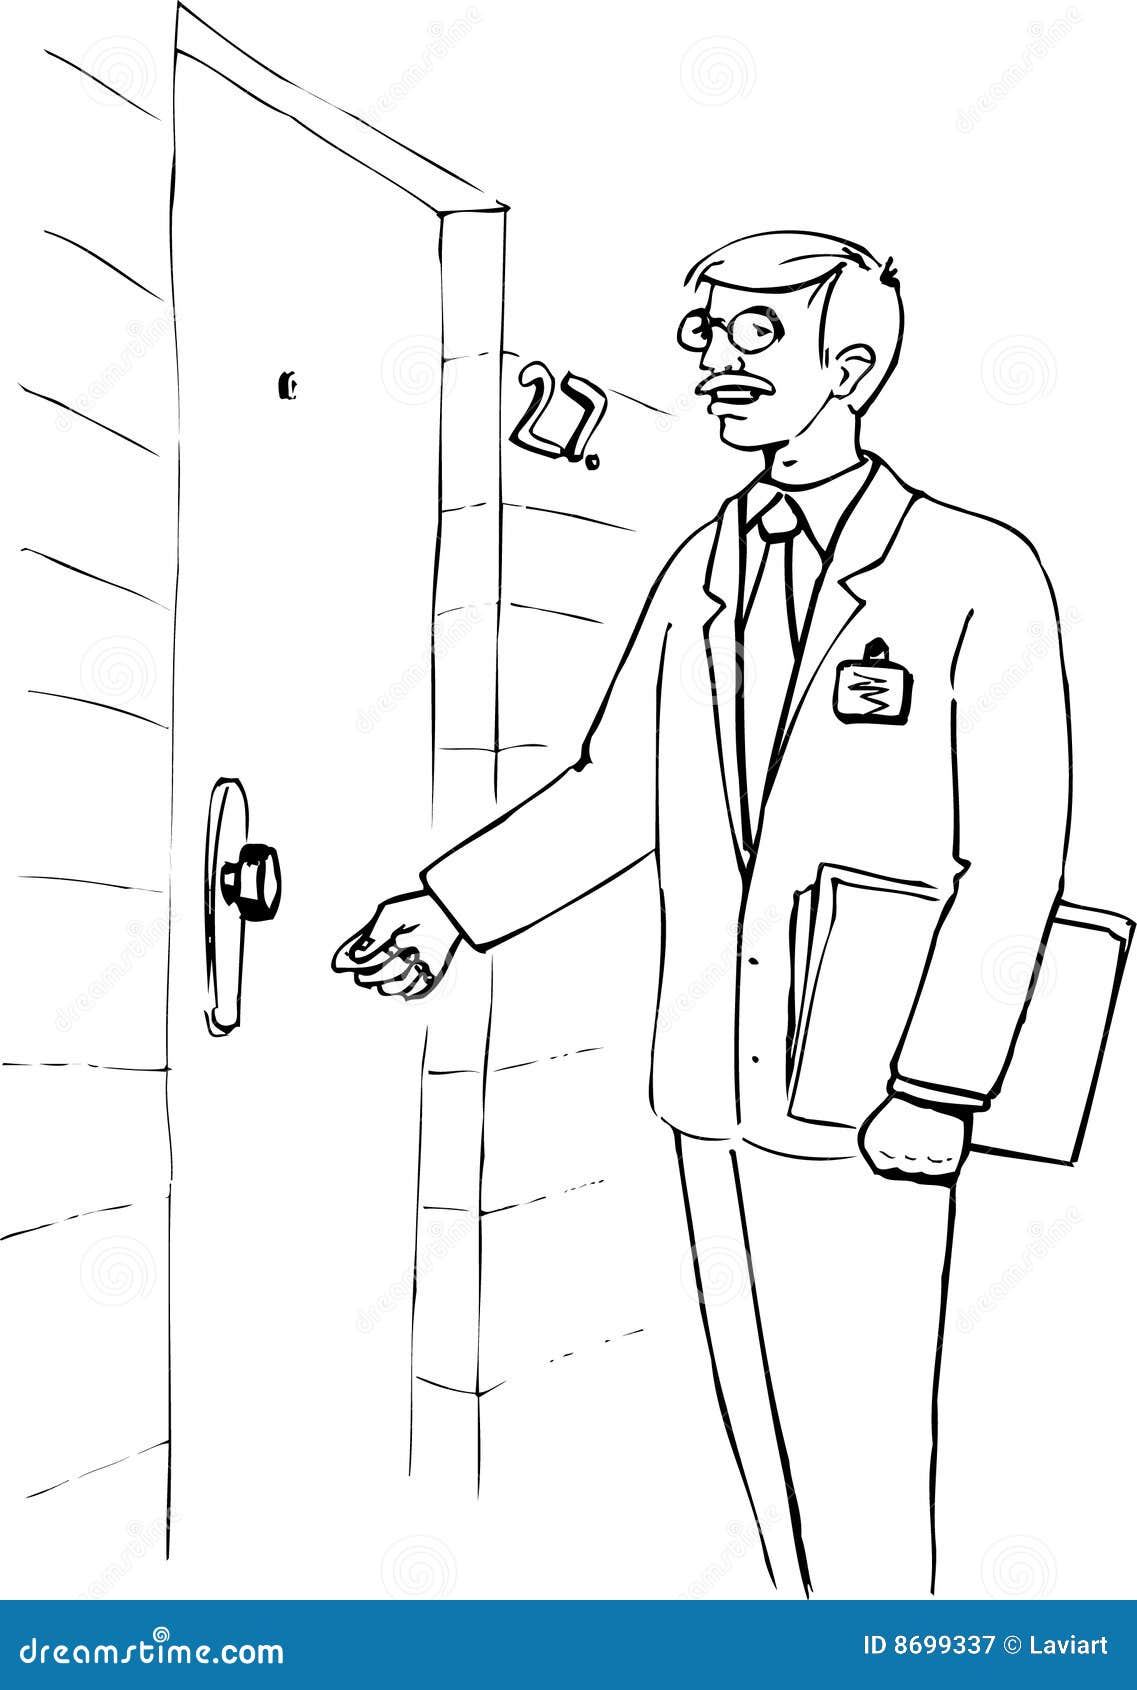 Illustration Of A Man Knocking At The Door Stock